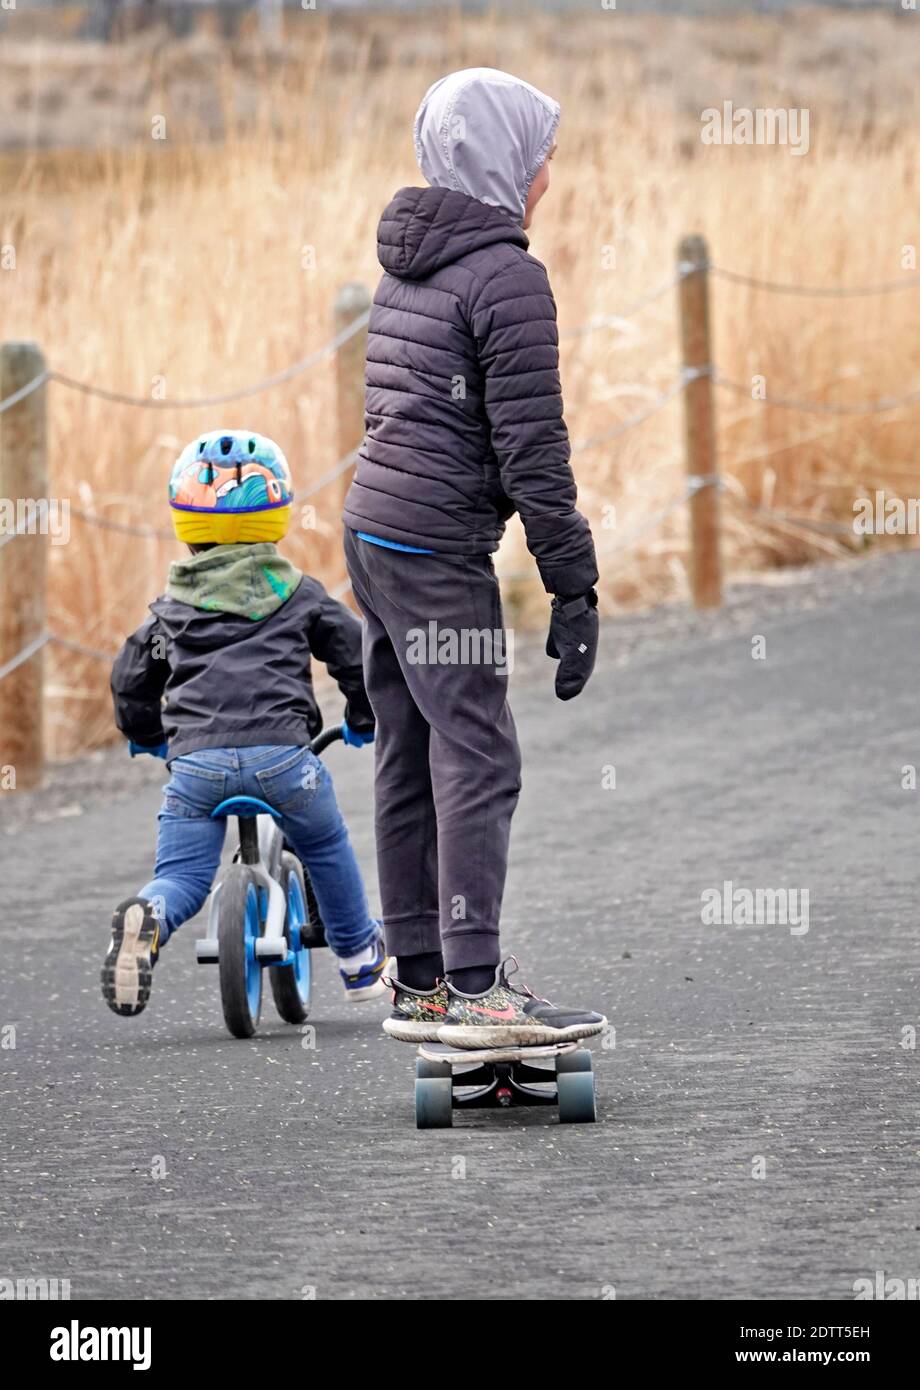 Young children ride and skate and rollerboard along a paved pathway in an rural setting in central Oregon. Stock Photo